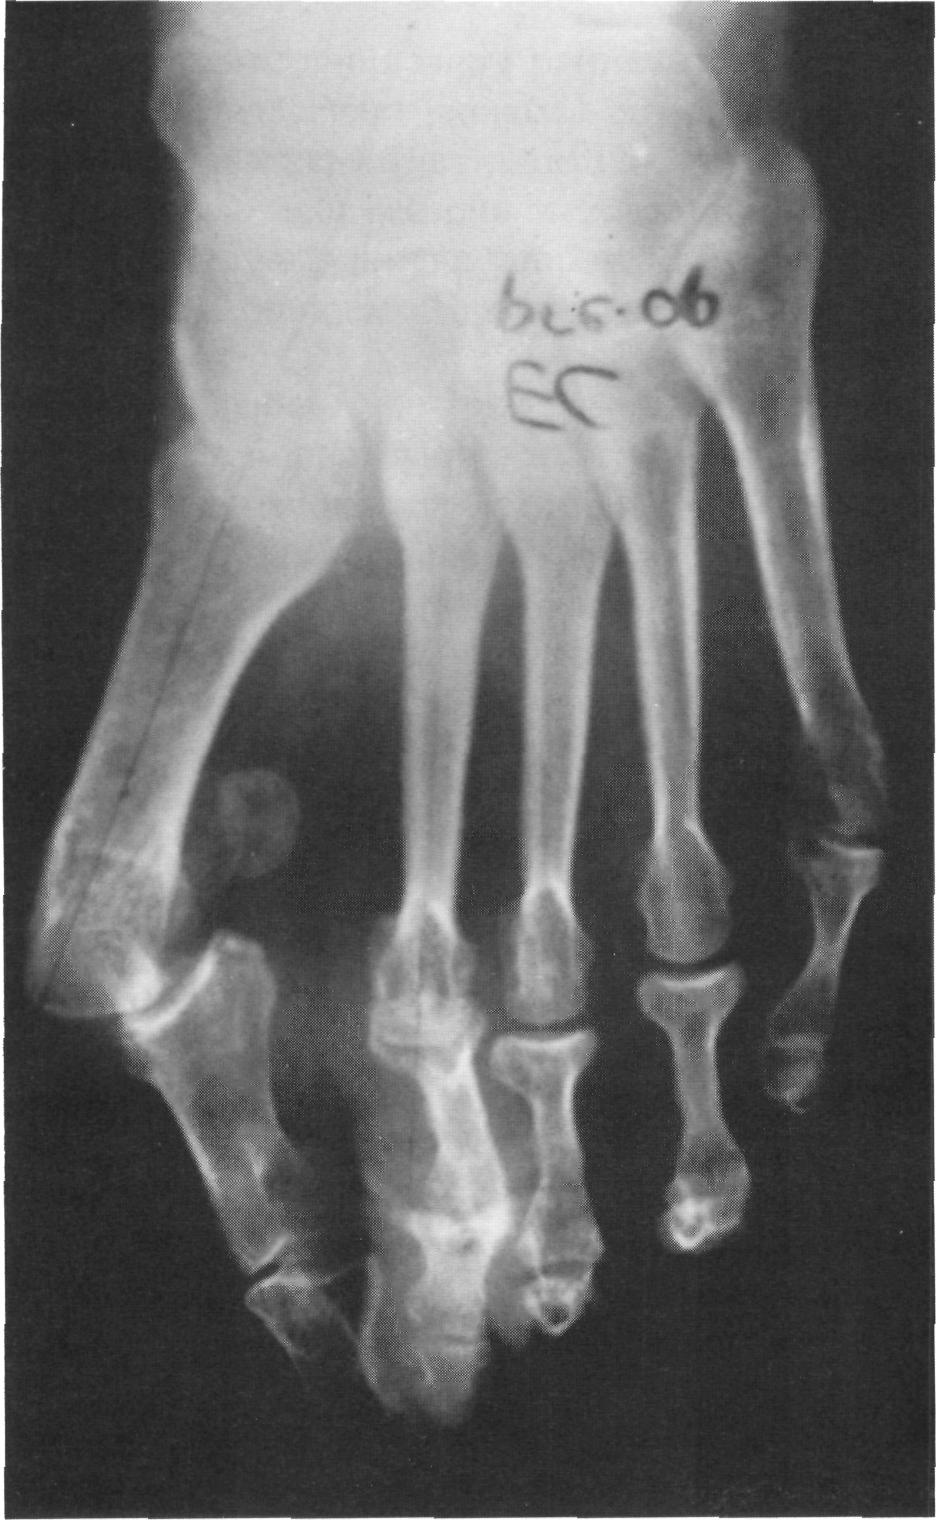 280 HALLUX VALGUS AND FOREFOOT SURGERY taken to assess the articular surface because in severe cases of hallux valgus, the functional articular surface is 20-30 percent of the total joint area.